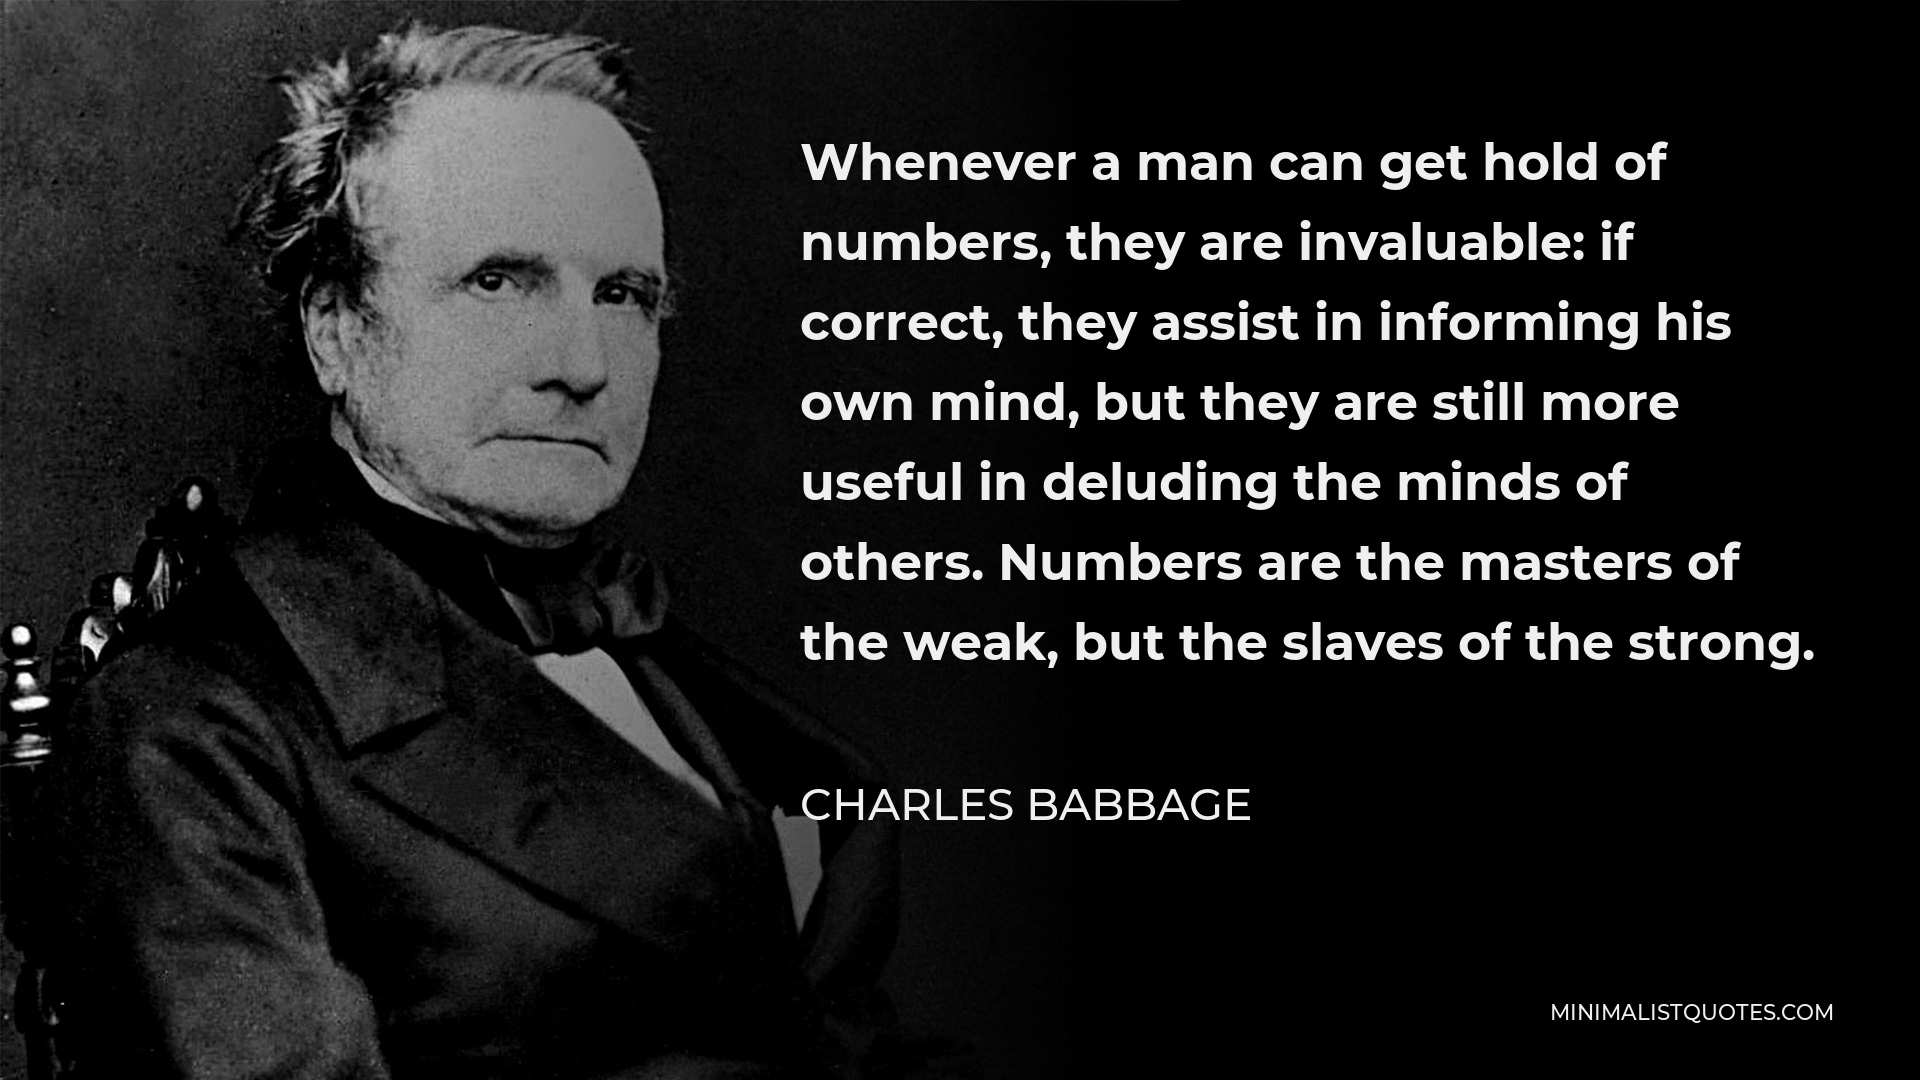 Charles Babbage Quote - Whenever a man can get hold of numbers, they are invaluable: if correct, they assist in informing his own mind, but they are still more useful in deluding the minds of others. Numbers are the masters of the weak, but the slaves of the strong.